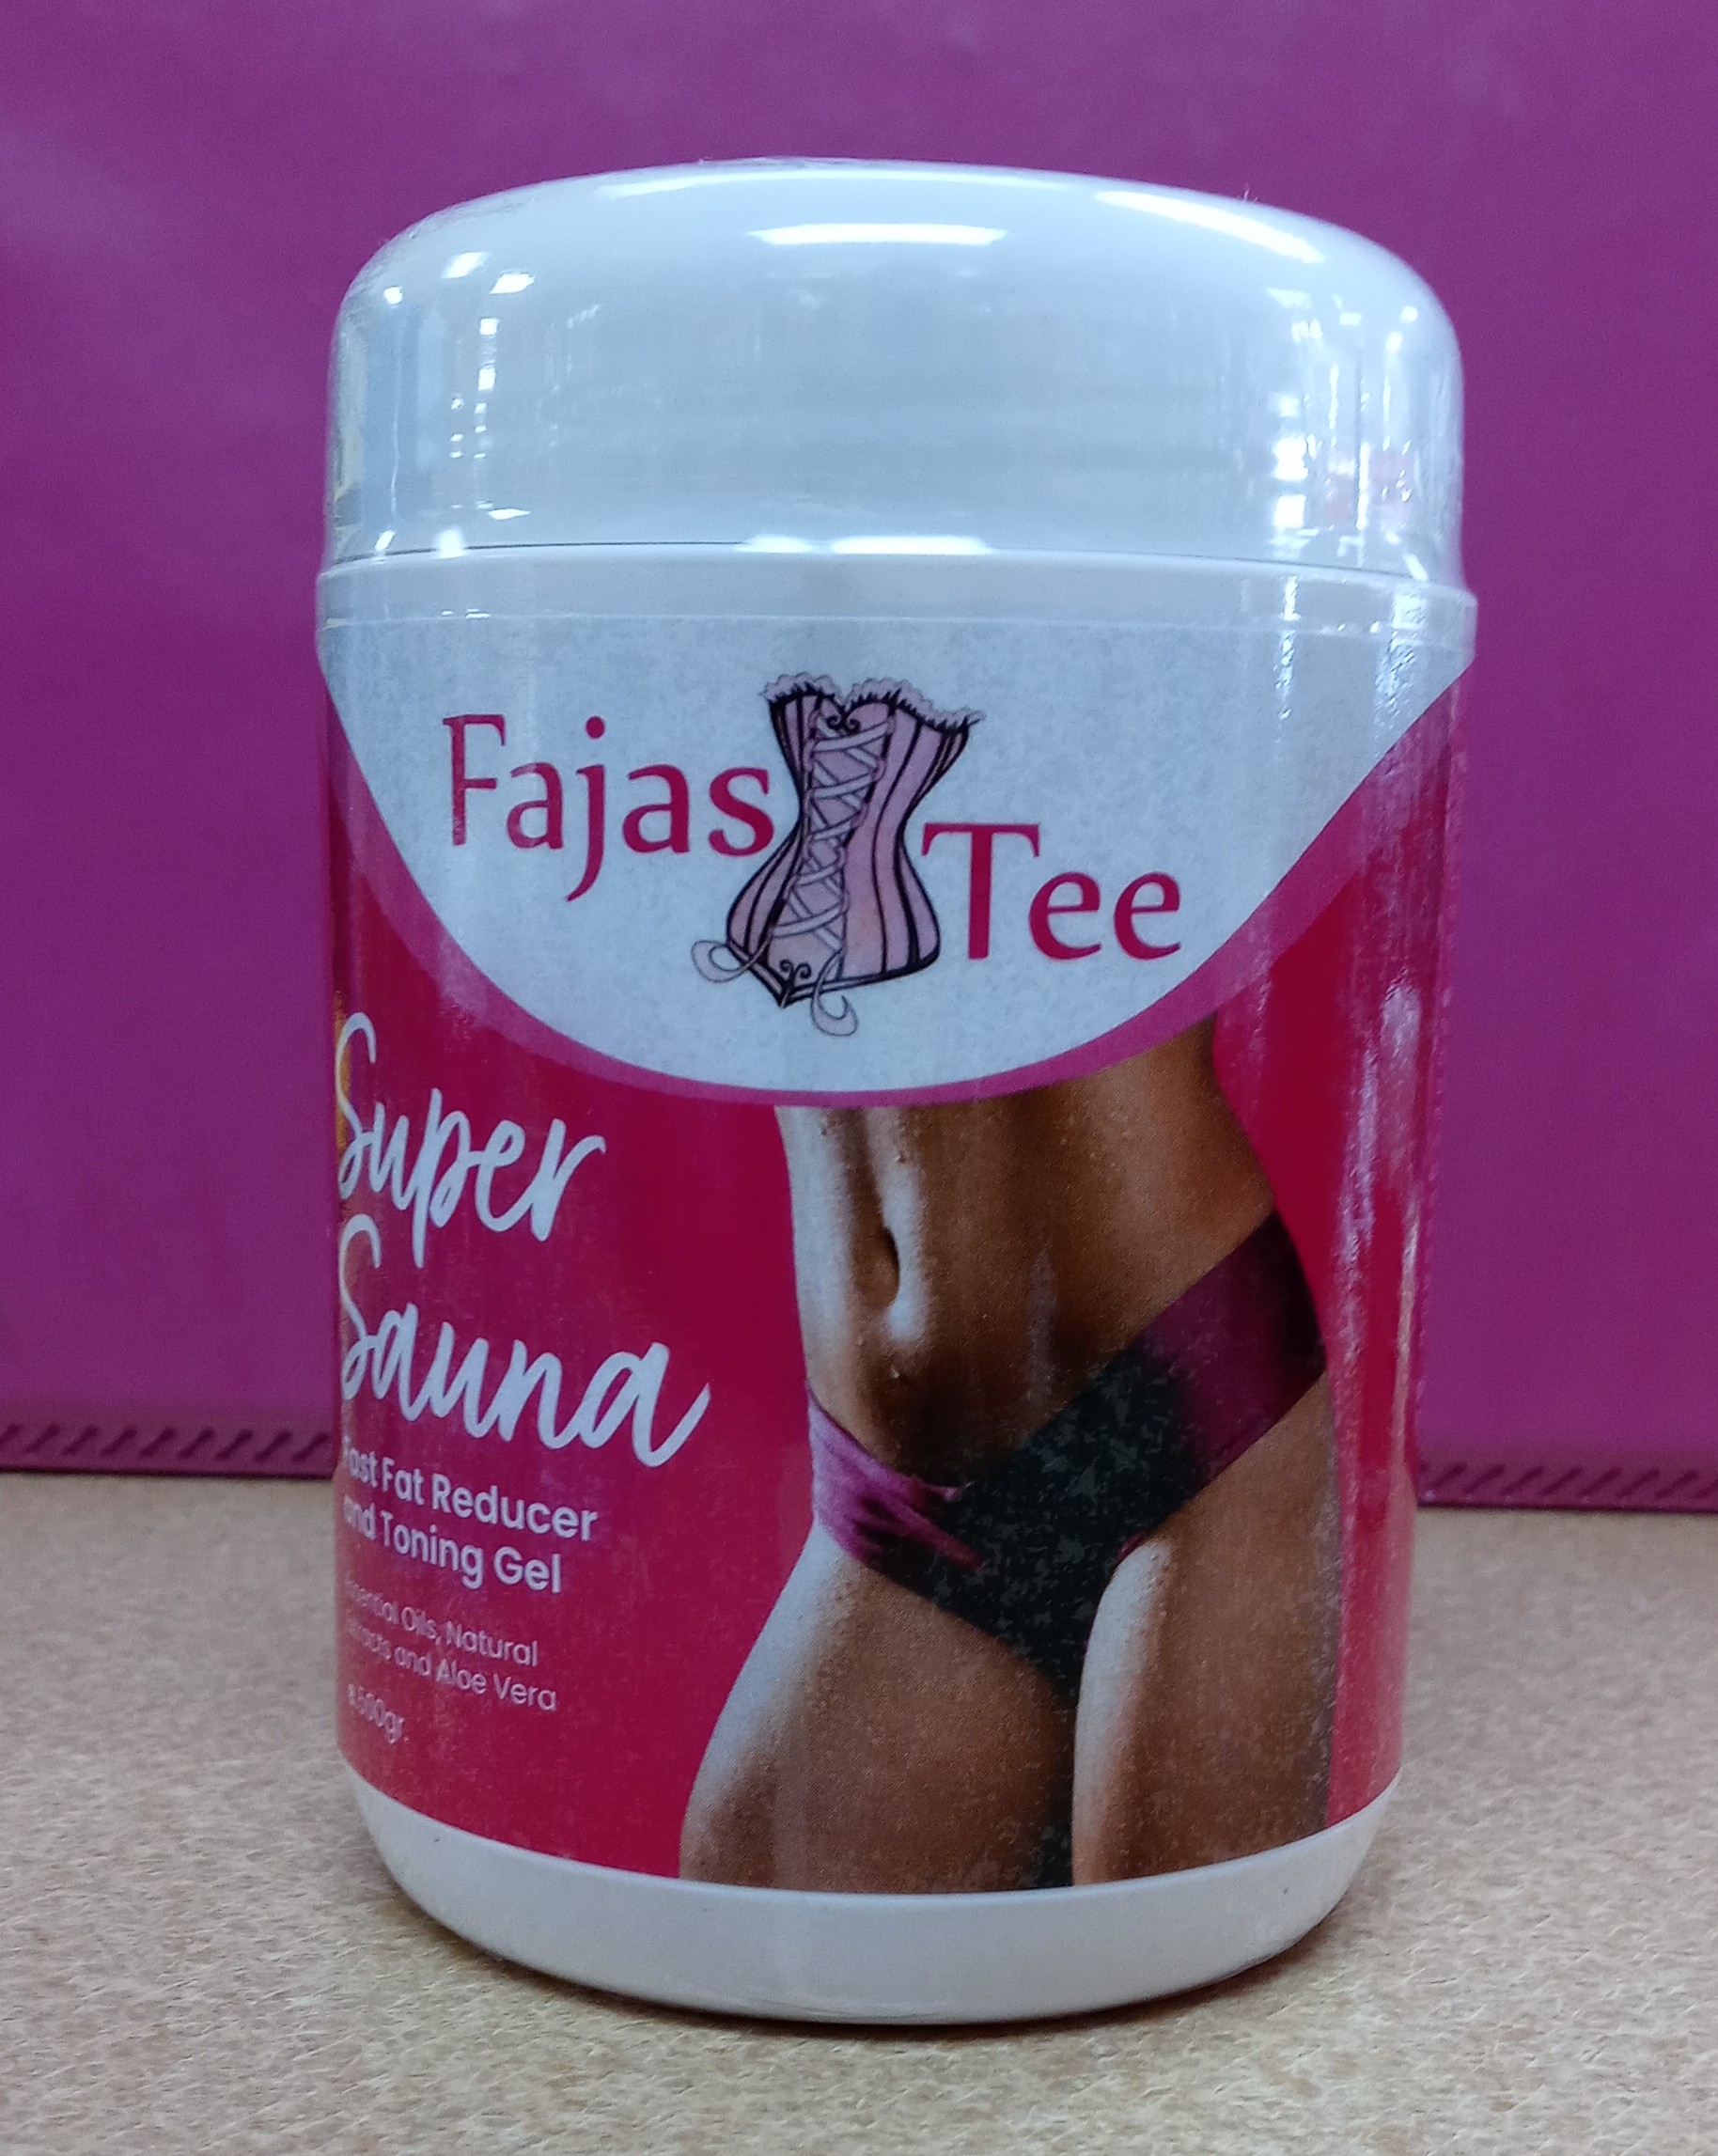 FAJAS TEE Fat Reducer and Toning Gel SUPER SAUNA 500g - Catherines Fashion